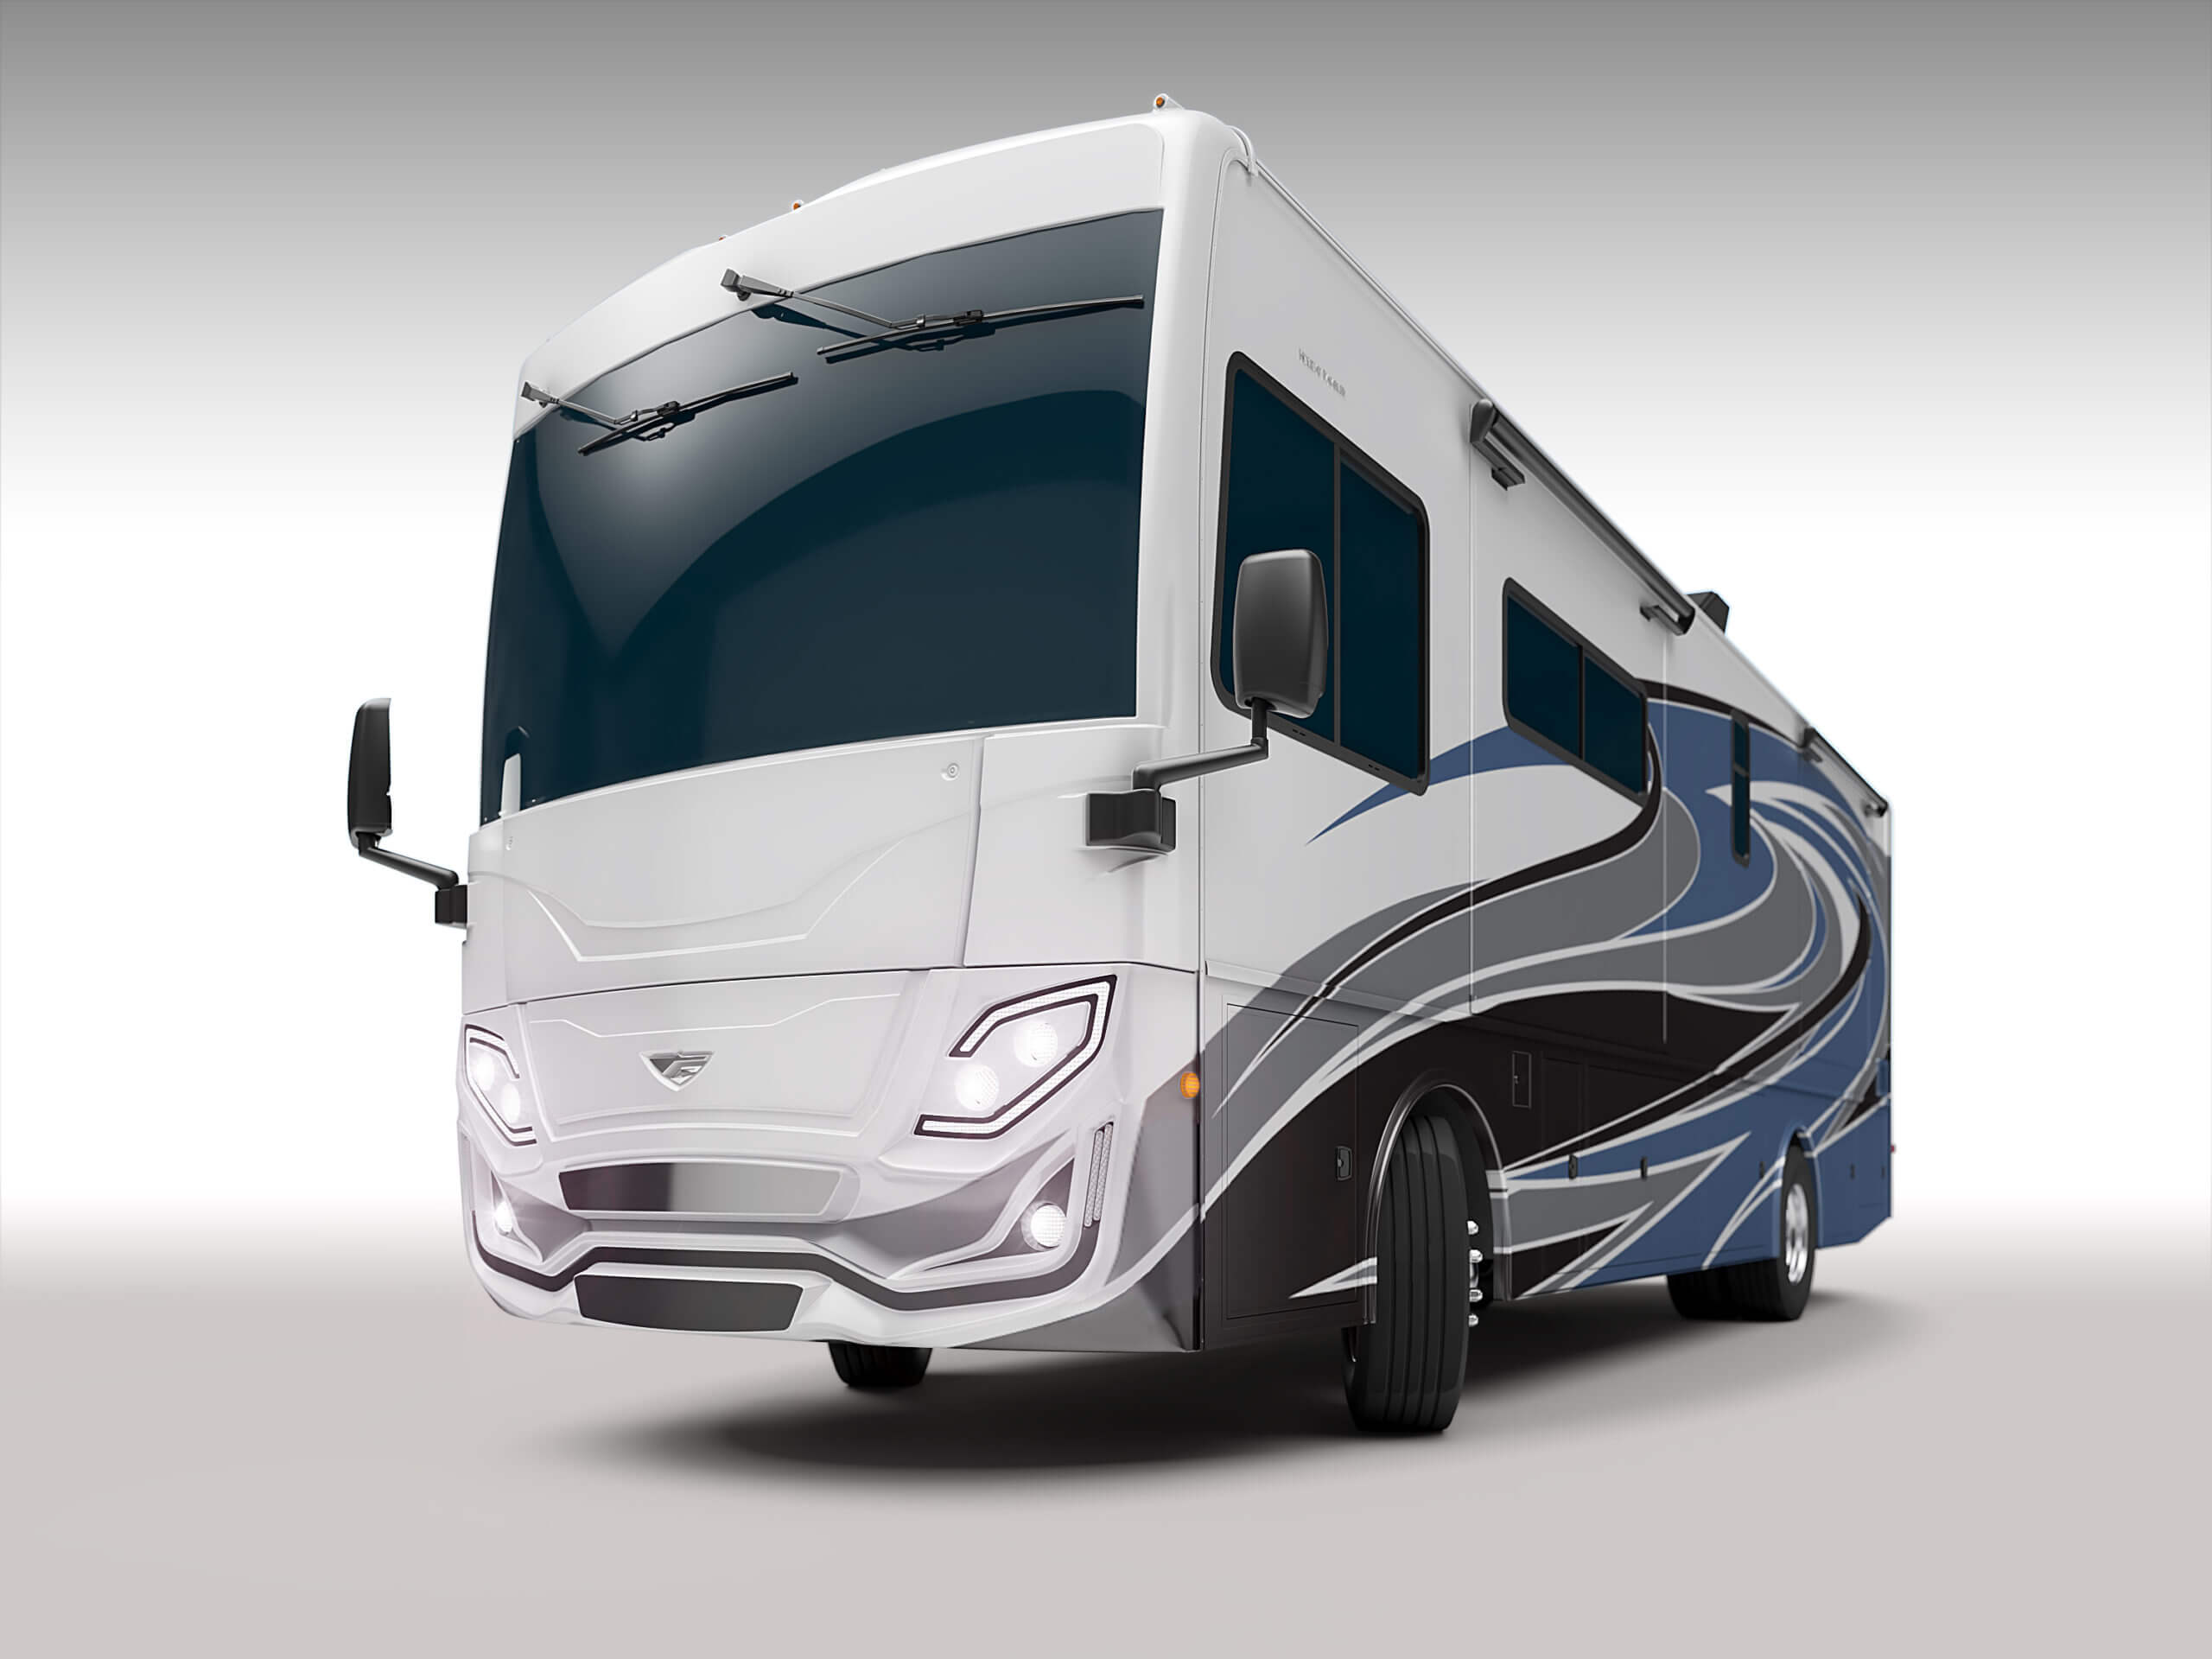 Image of Fleetwood RV Frontier on a white background